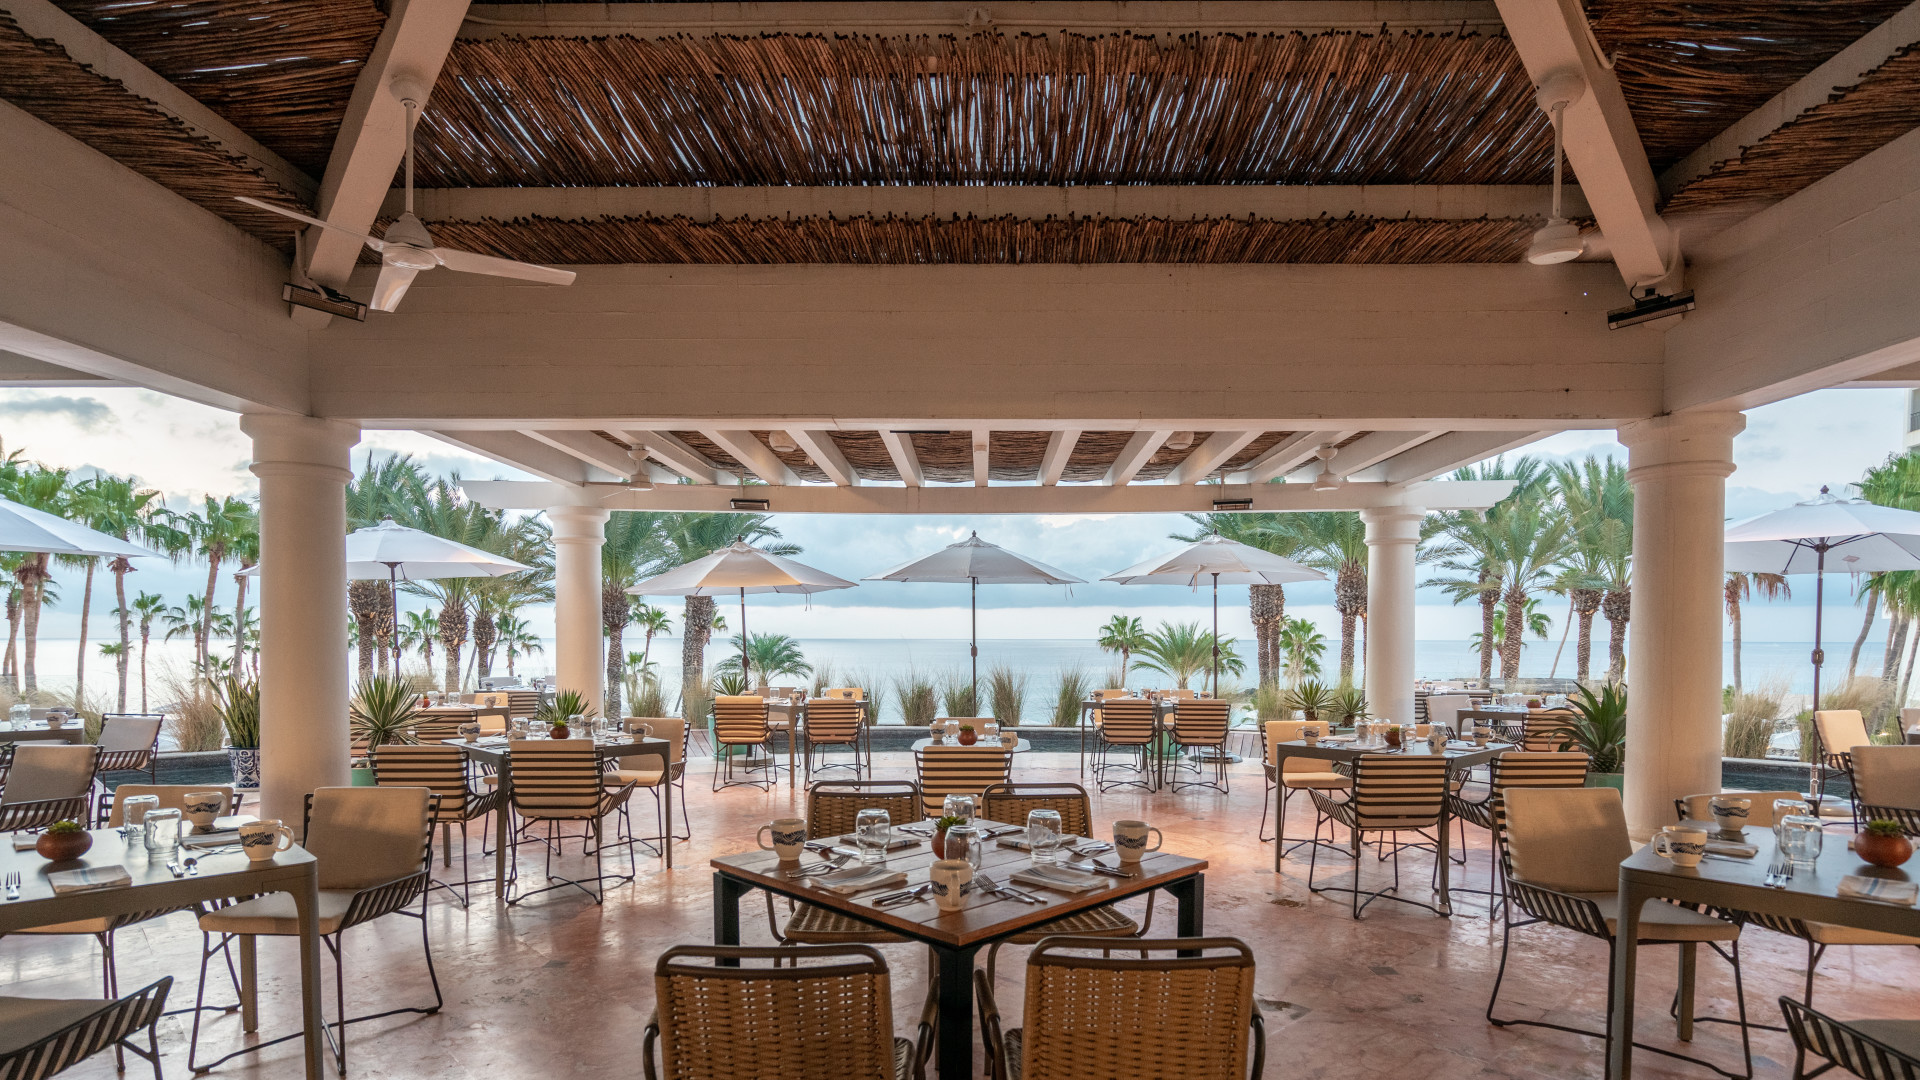 Dining Area of Talavera Restaurant with Beach View